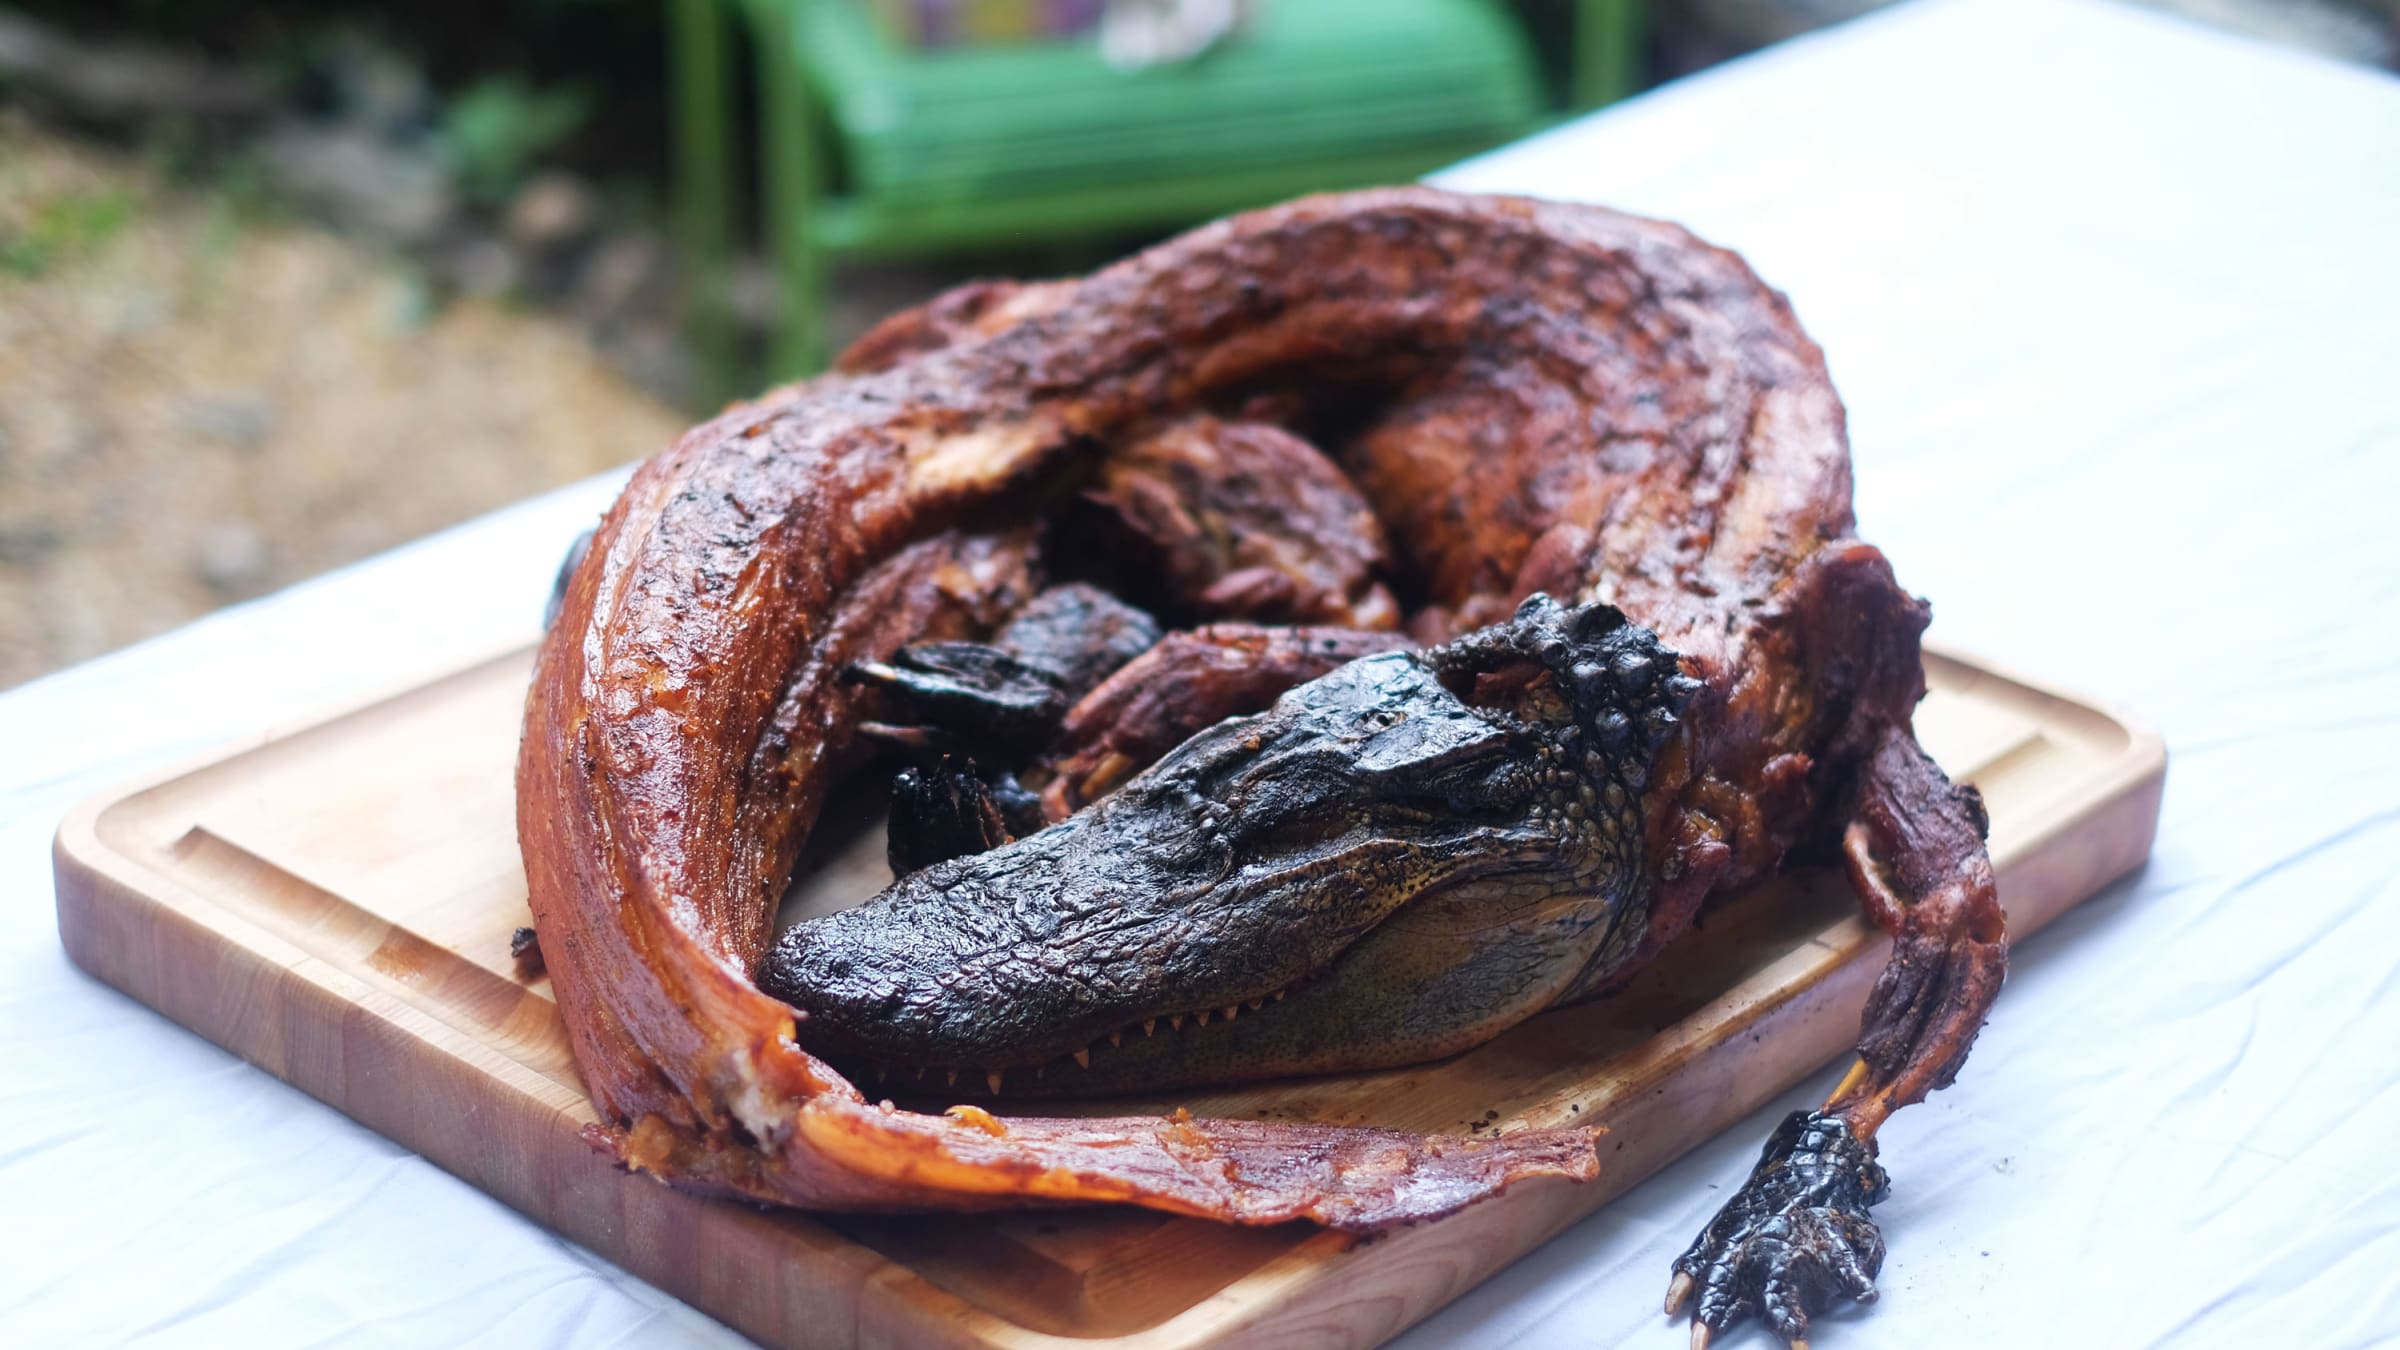 Yes, You Can Cook a Whole Alligator at Home